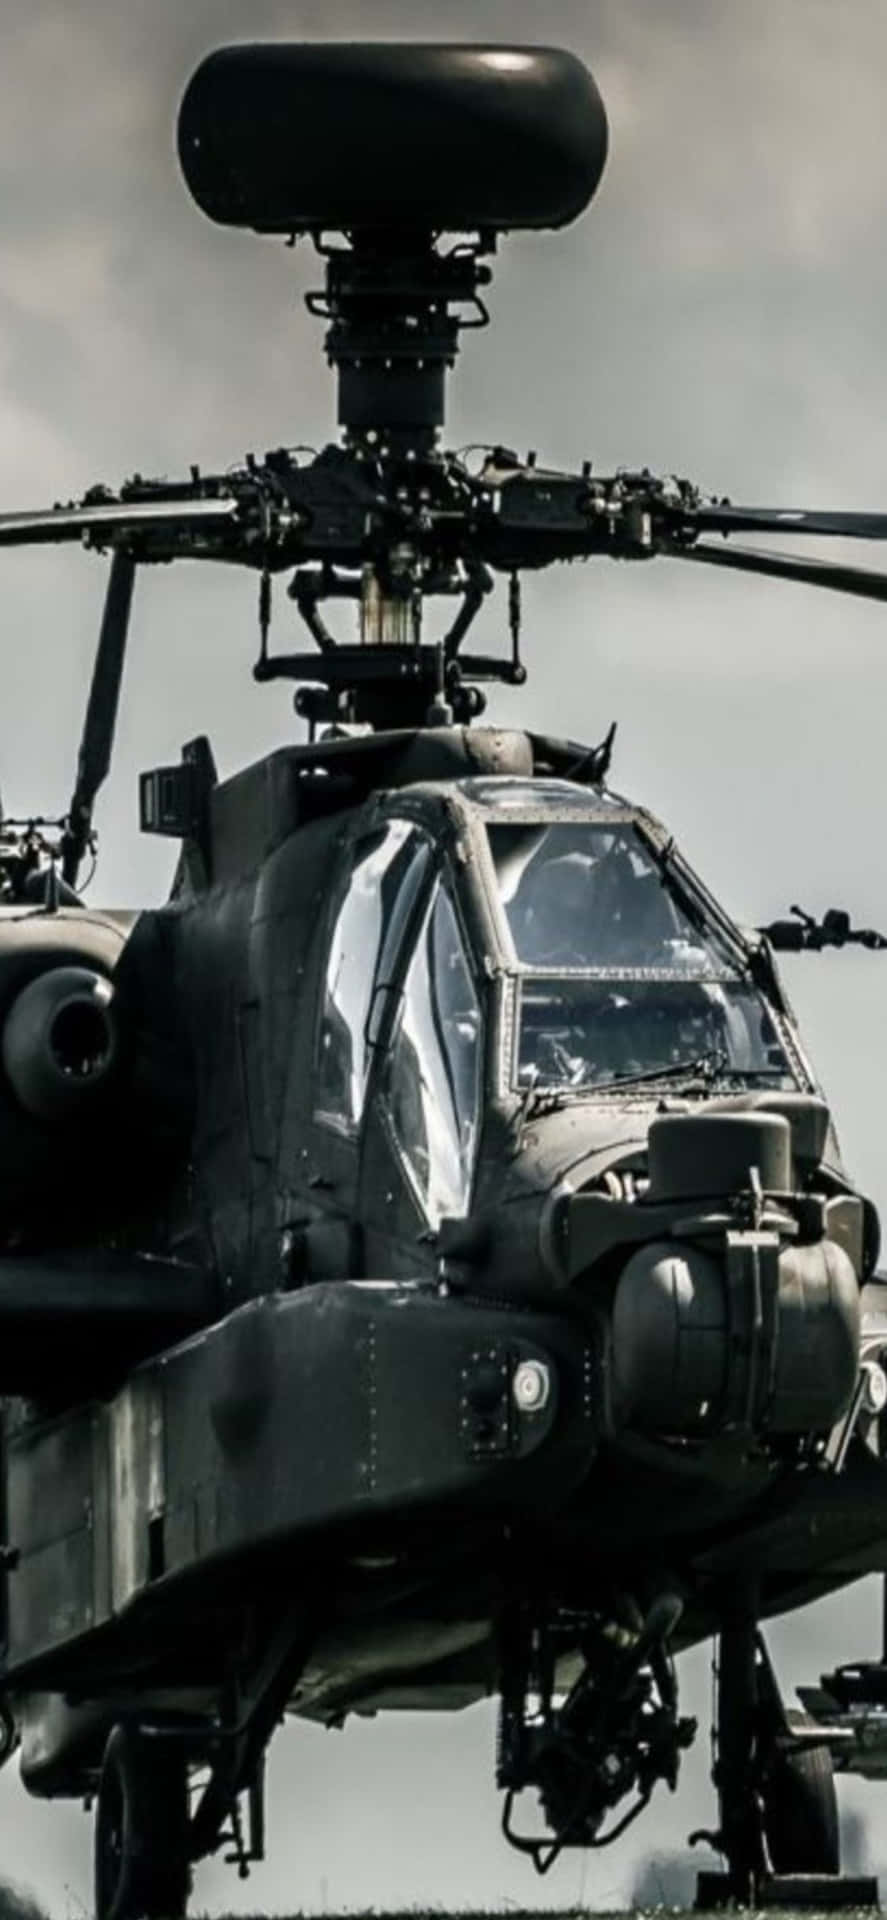 helicopter military iphone 5 wallpaper